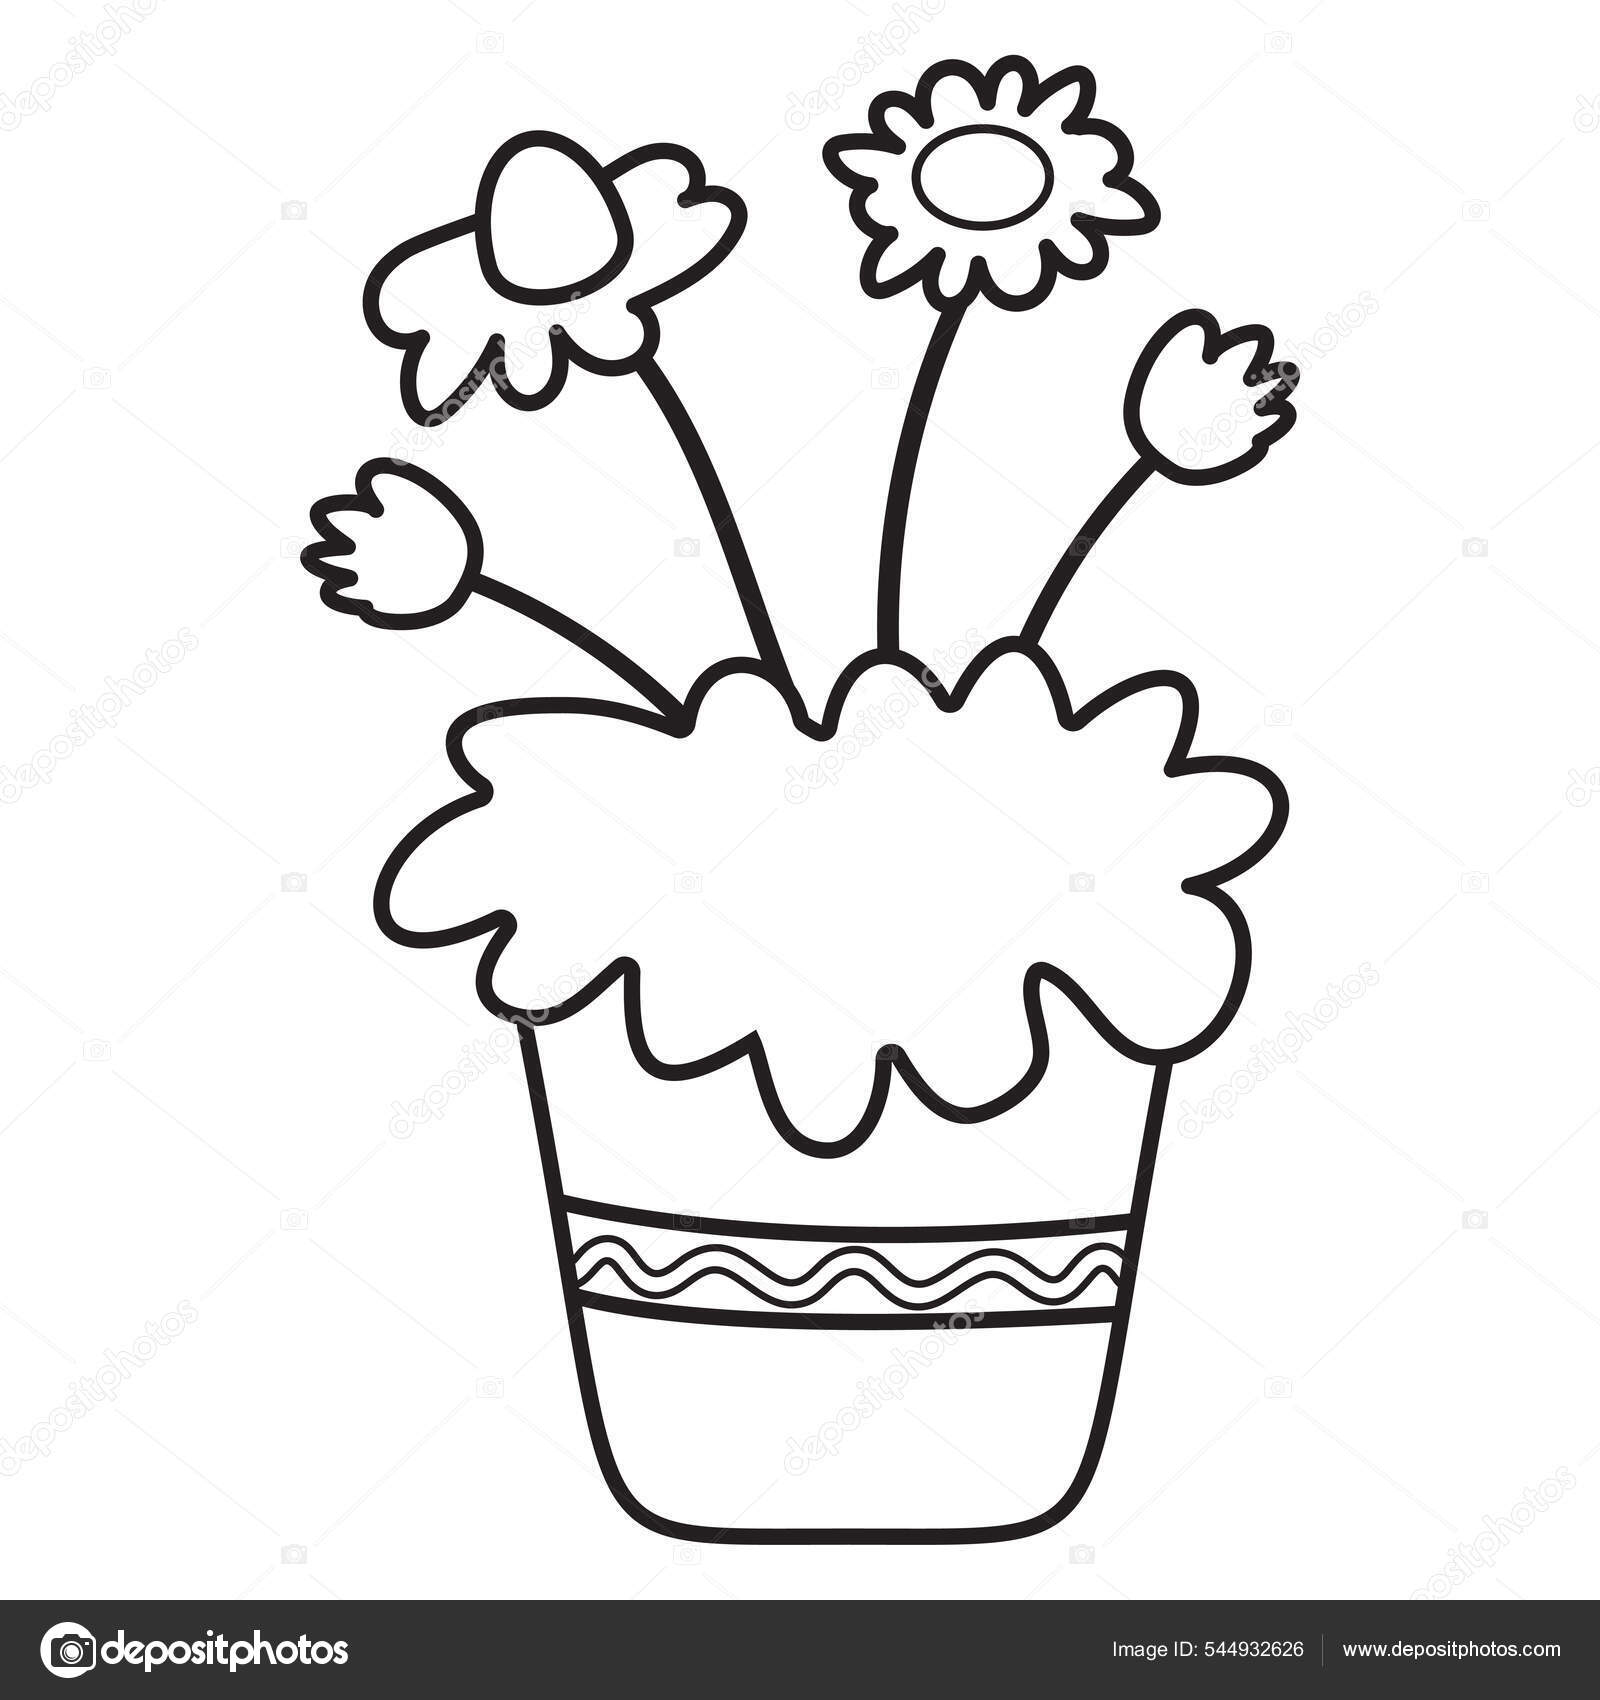 line drawings of flowers in vases - Google Search | Flower drawing, Flower  line drawings, Flower coloring pages